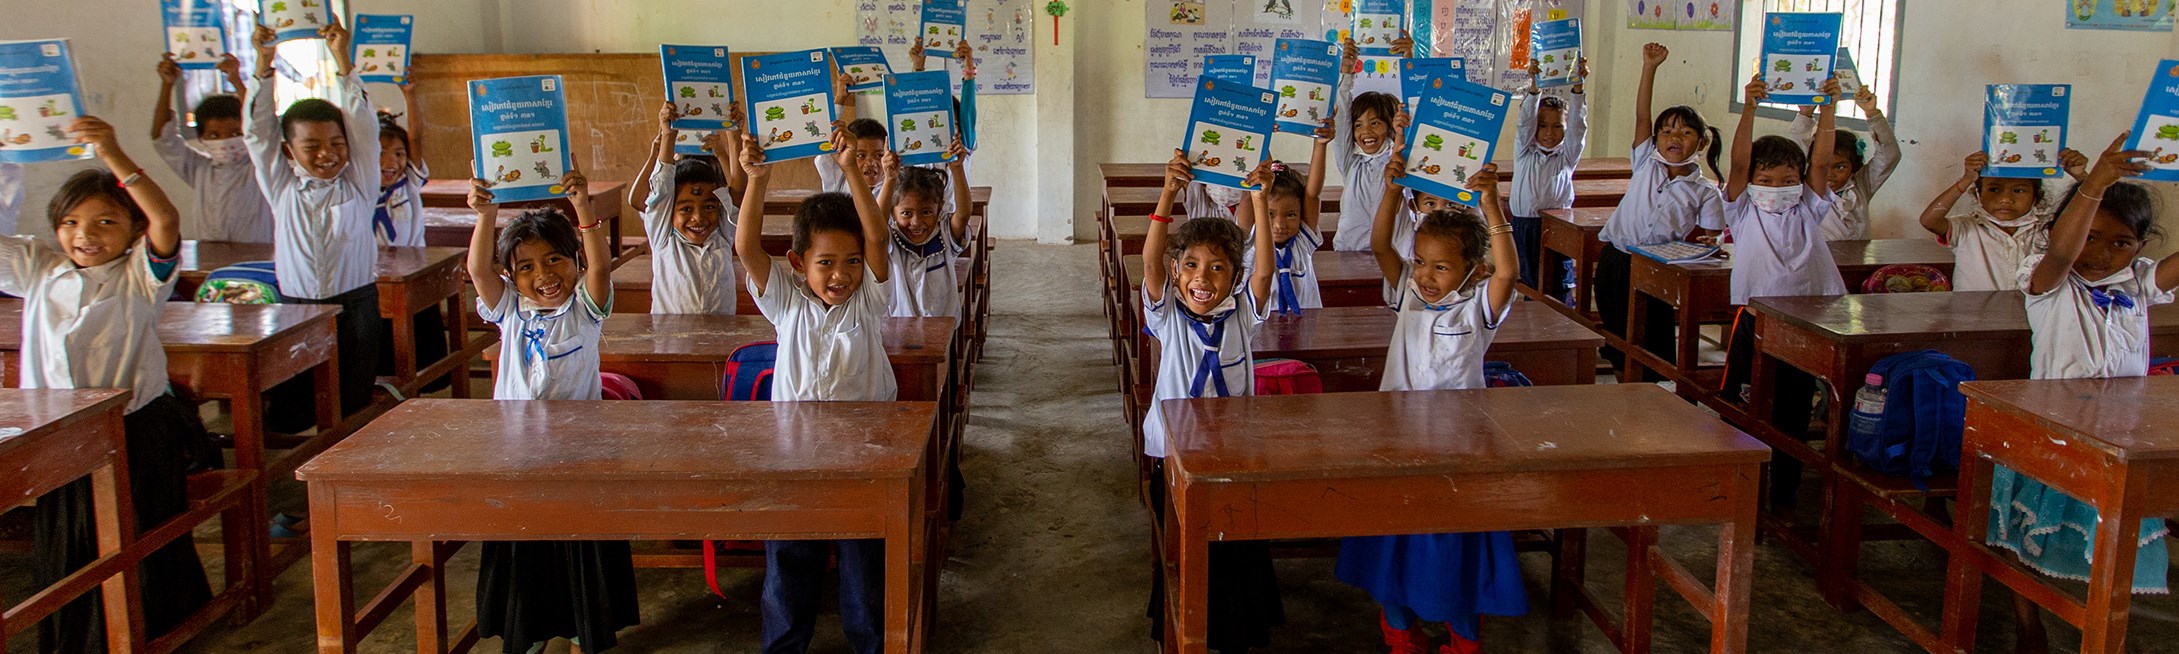 Students in classroom holding up books and smiling